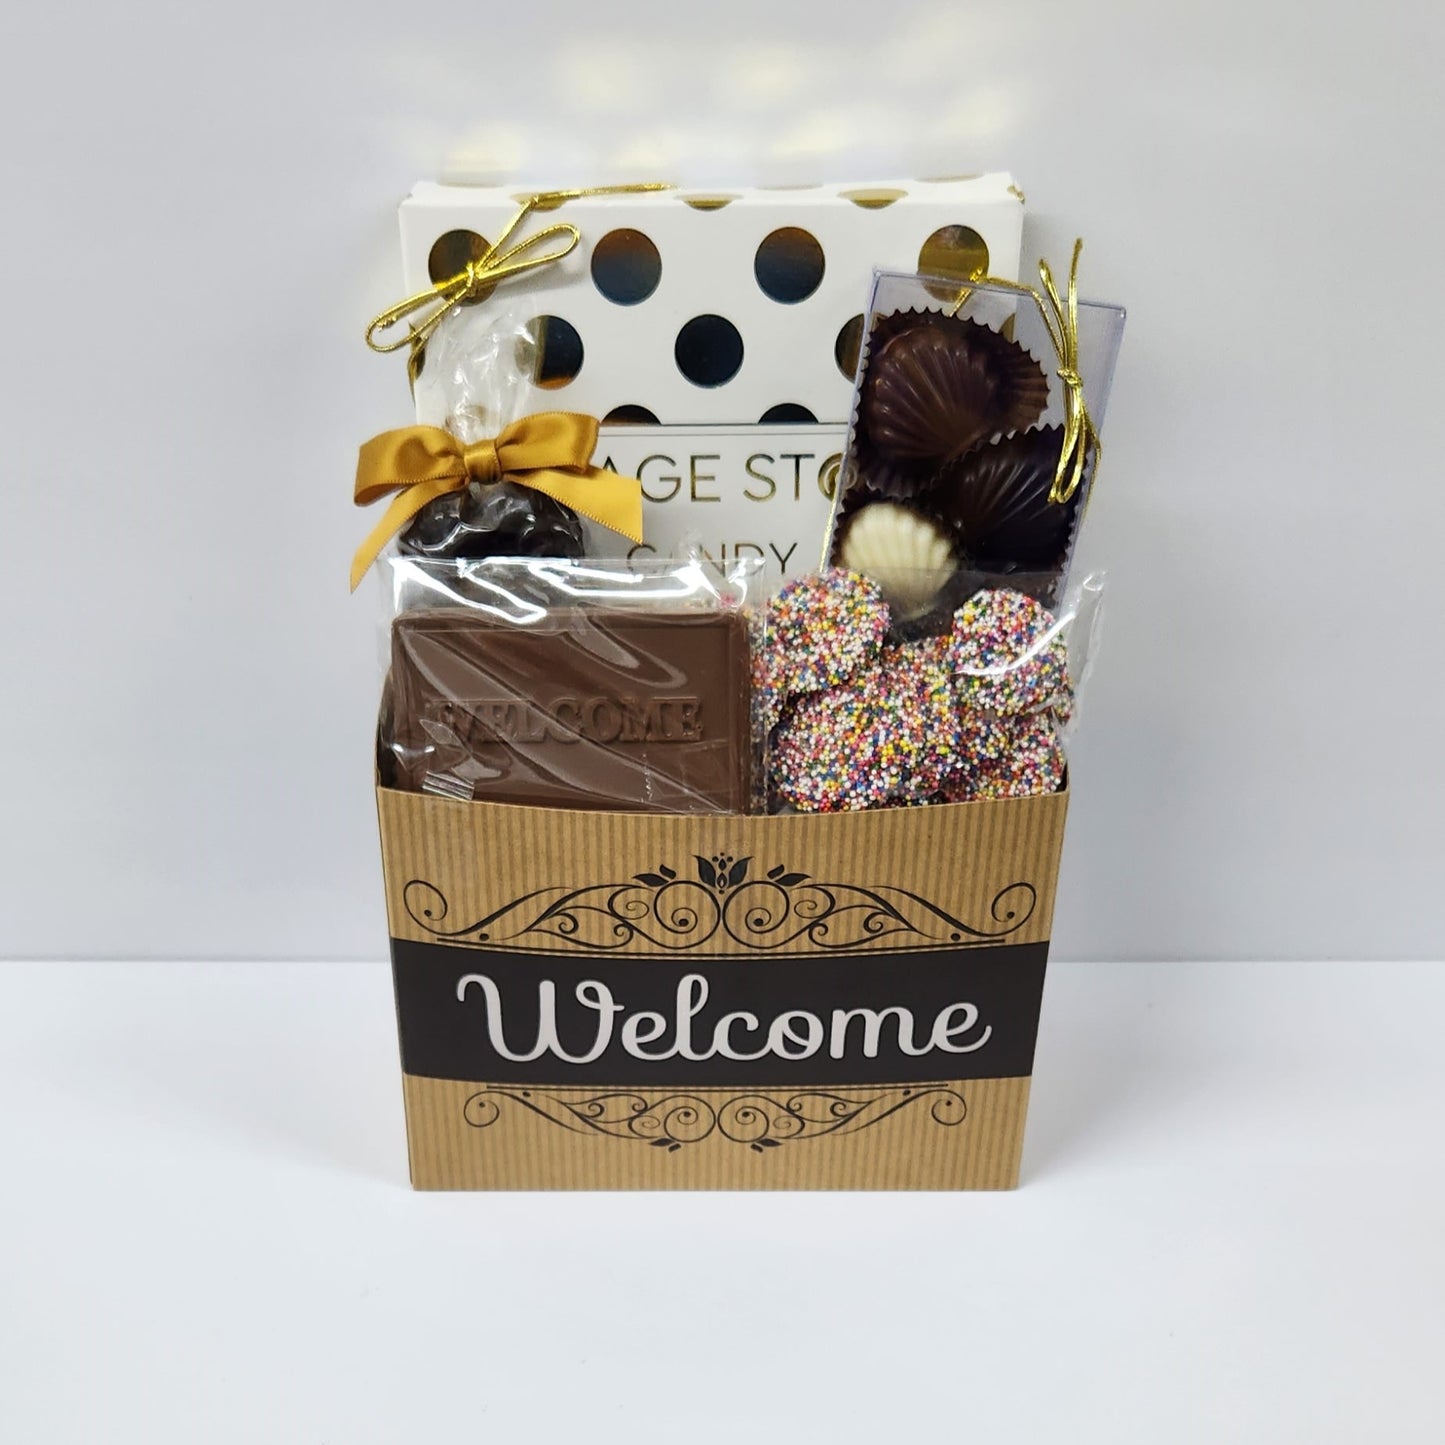 Chocolate Welcome Basket includes milk, dark and white chocolate sea shells, crunchy milk chocolate nonpareils, savory dark chocolate covered cranberries, and a 16 piece chocolate assortment filled with creams, caramels, meltaways and truffles.